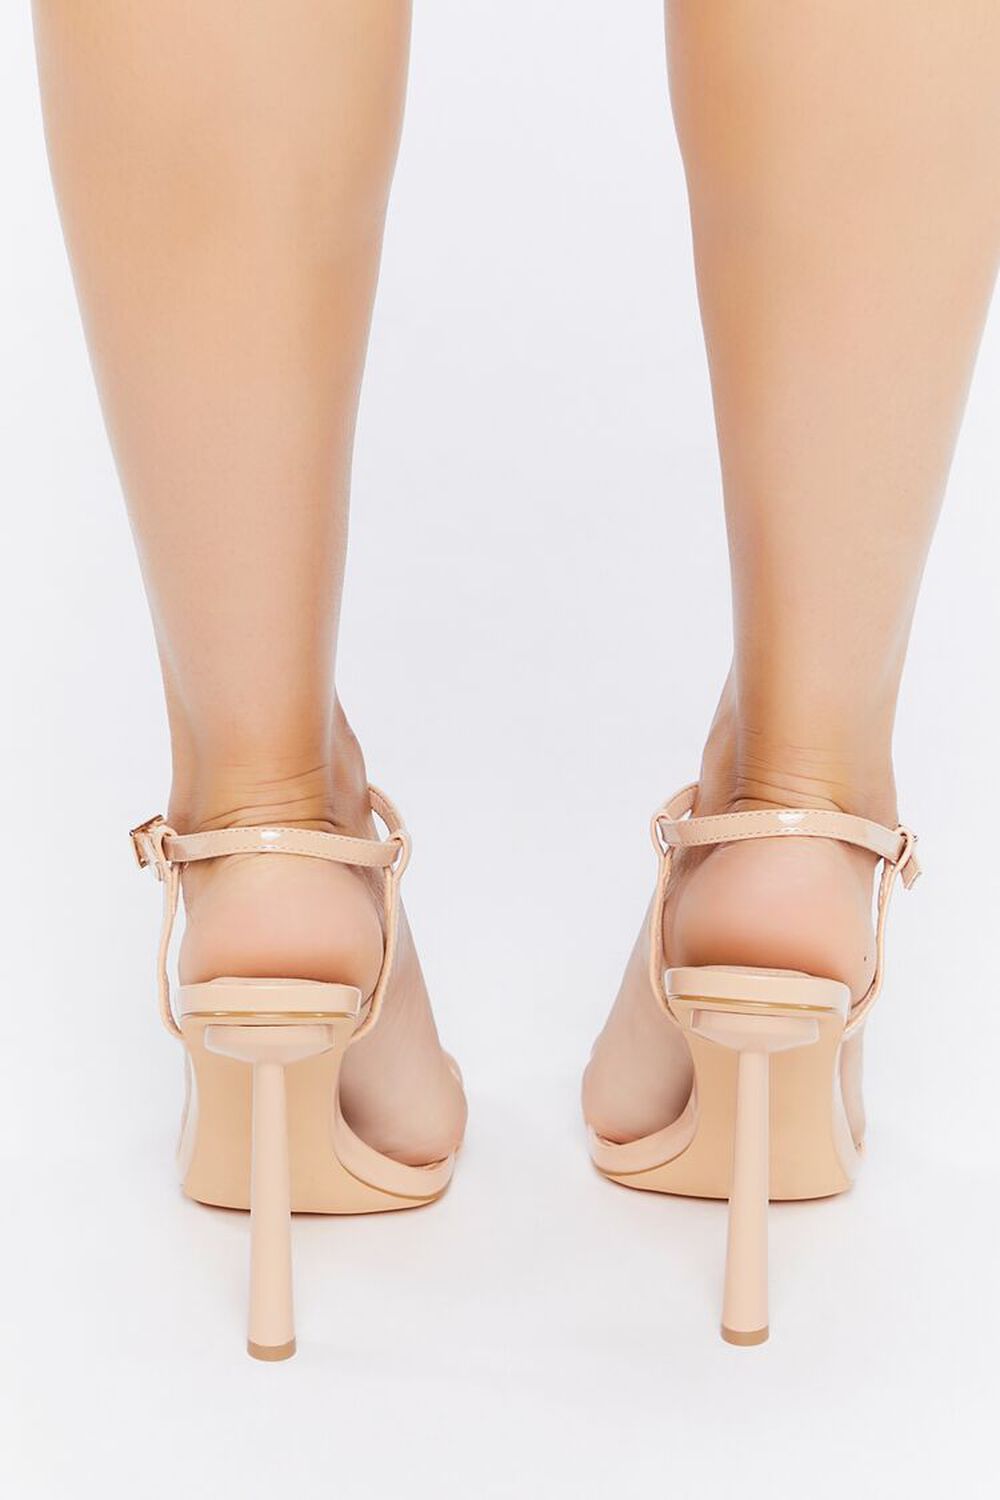 NUDE Faux Patent Leather Heels, image 3